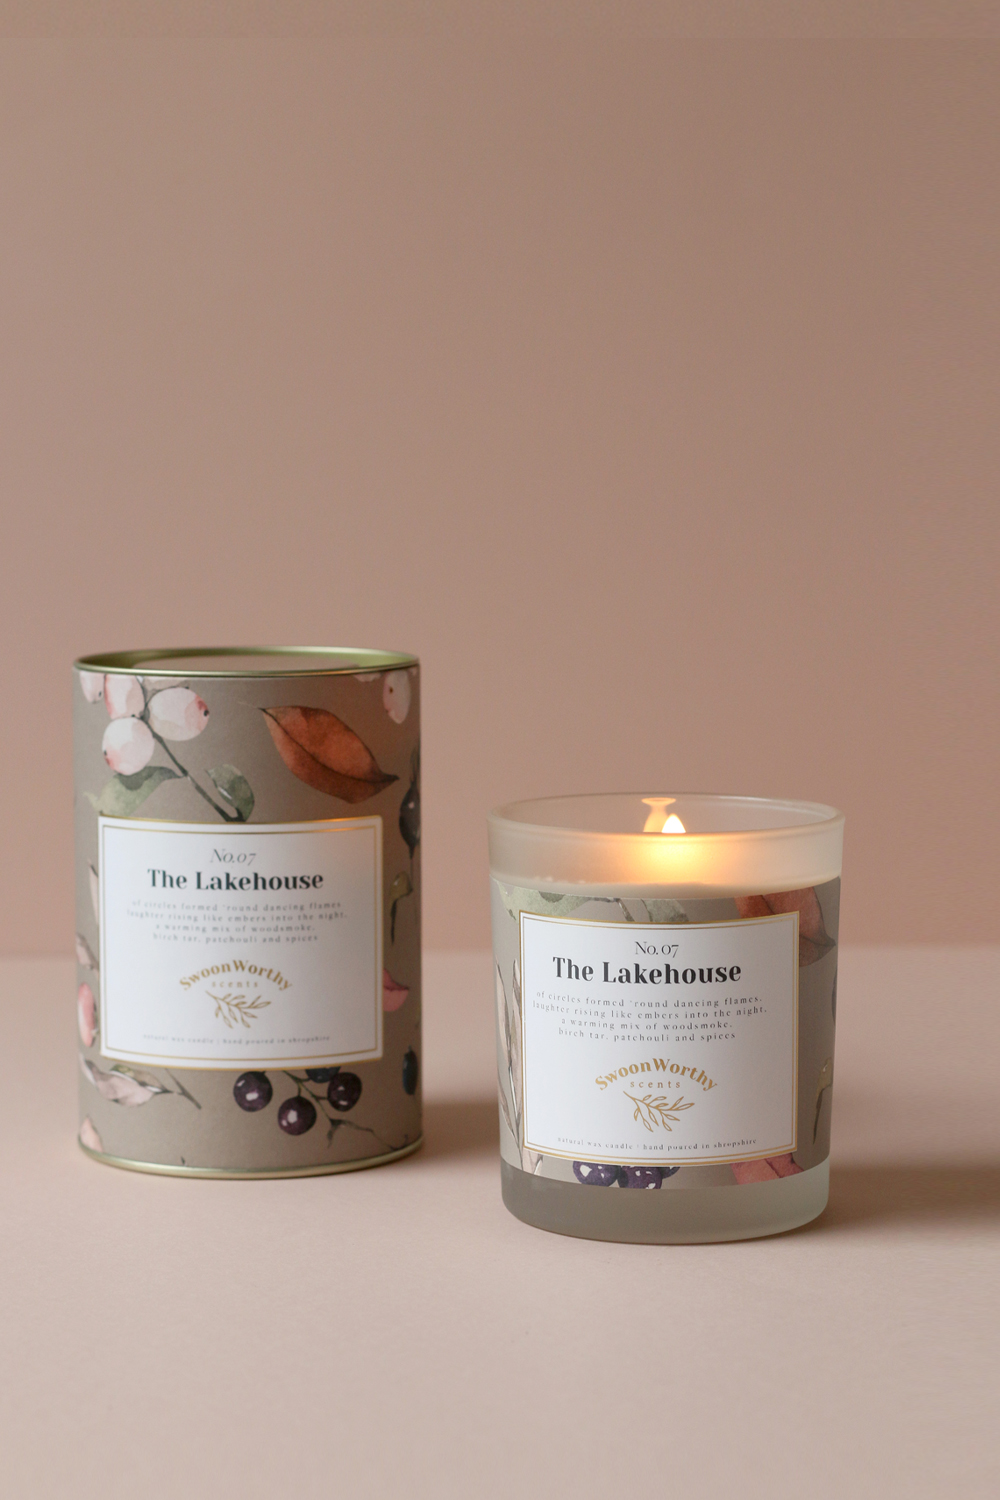 No 07 The Lakehouse candle